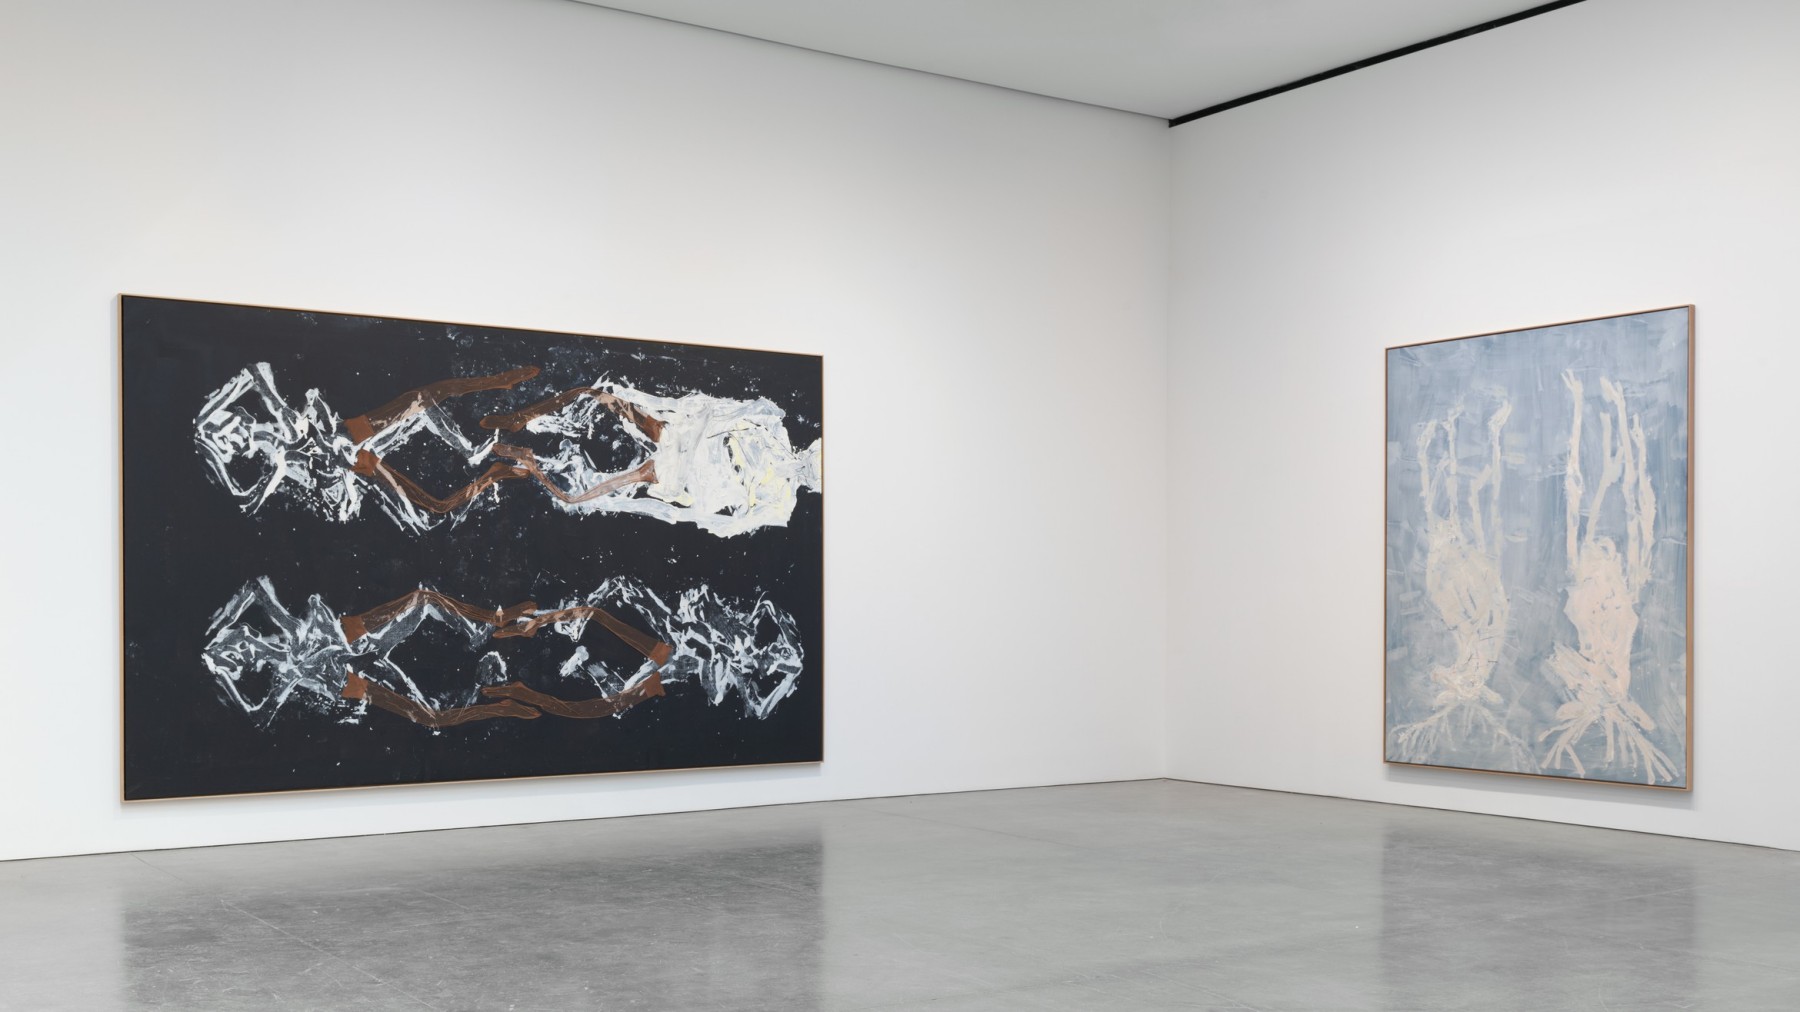 Installation image for Georg Baselitz: The Painter in His Bed, at Gagosian